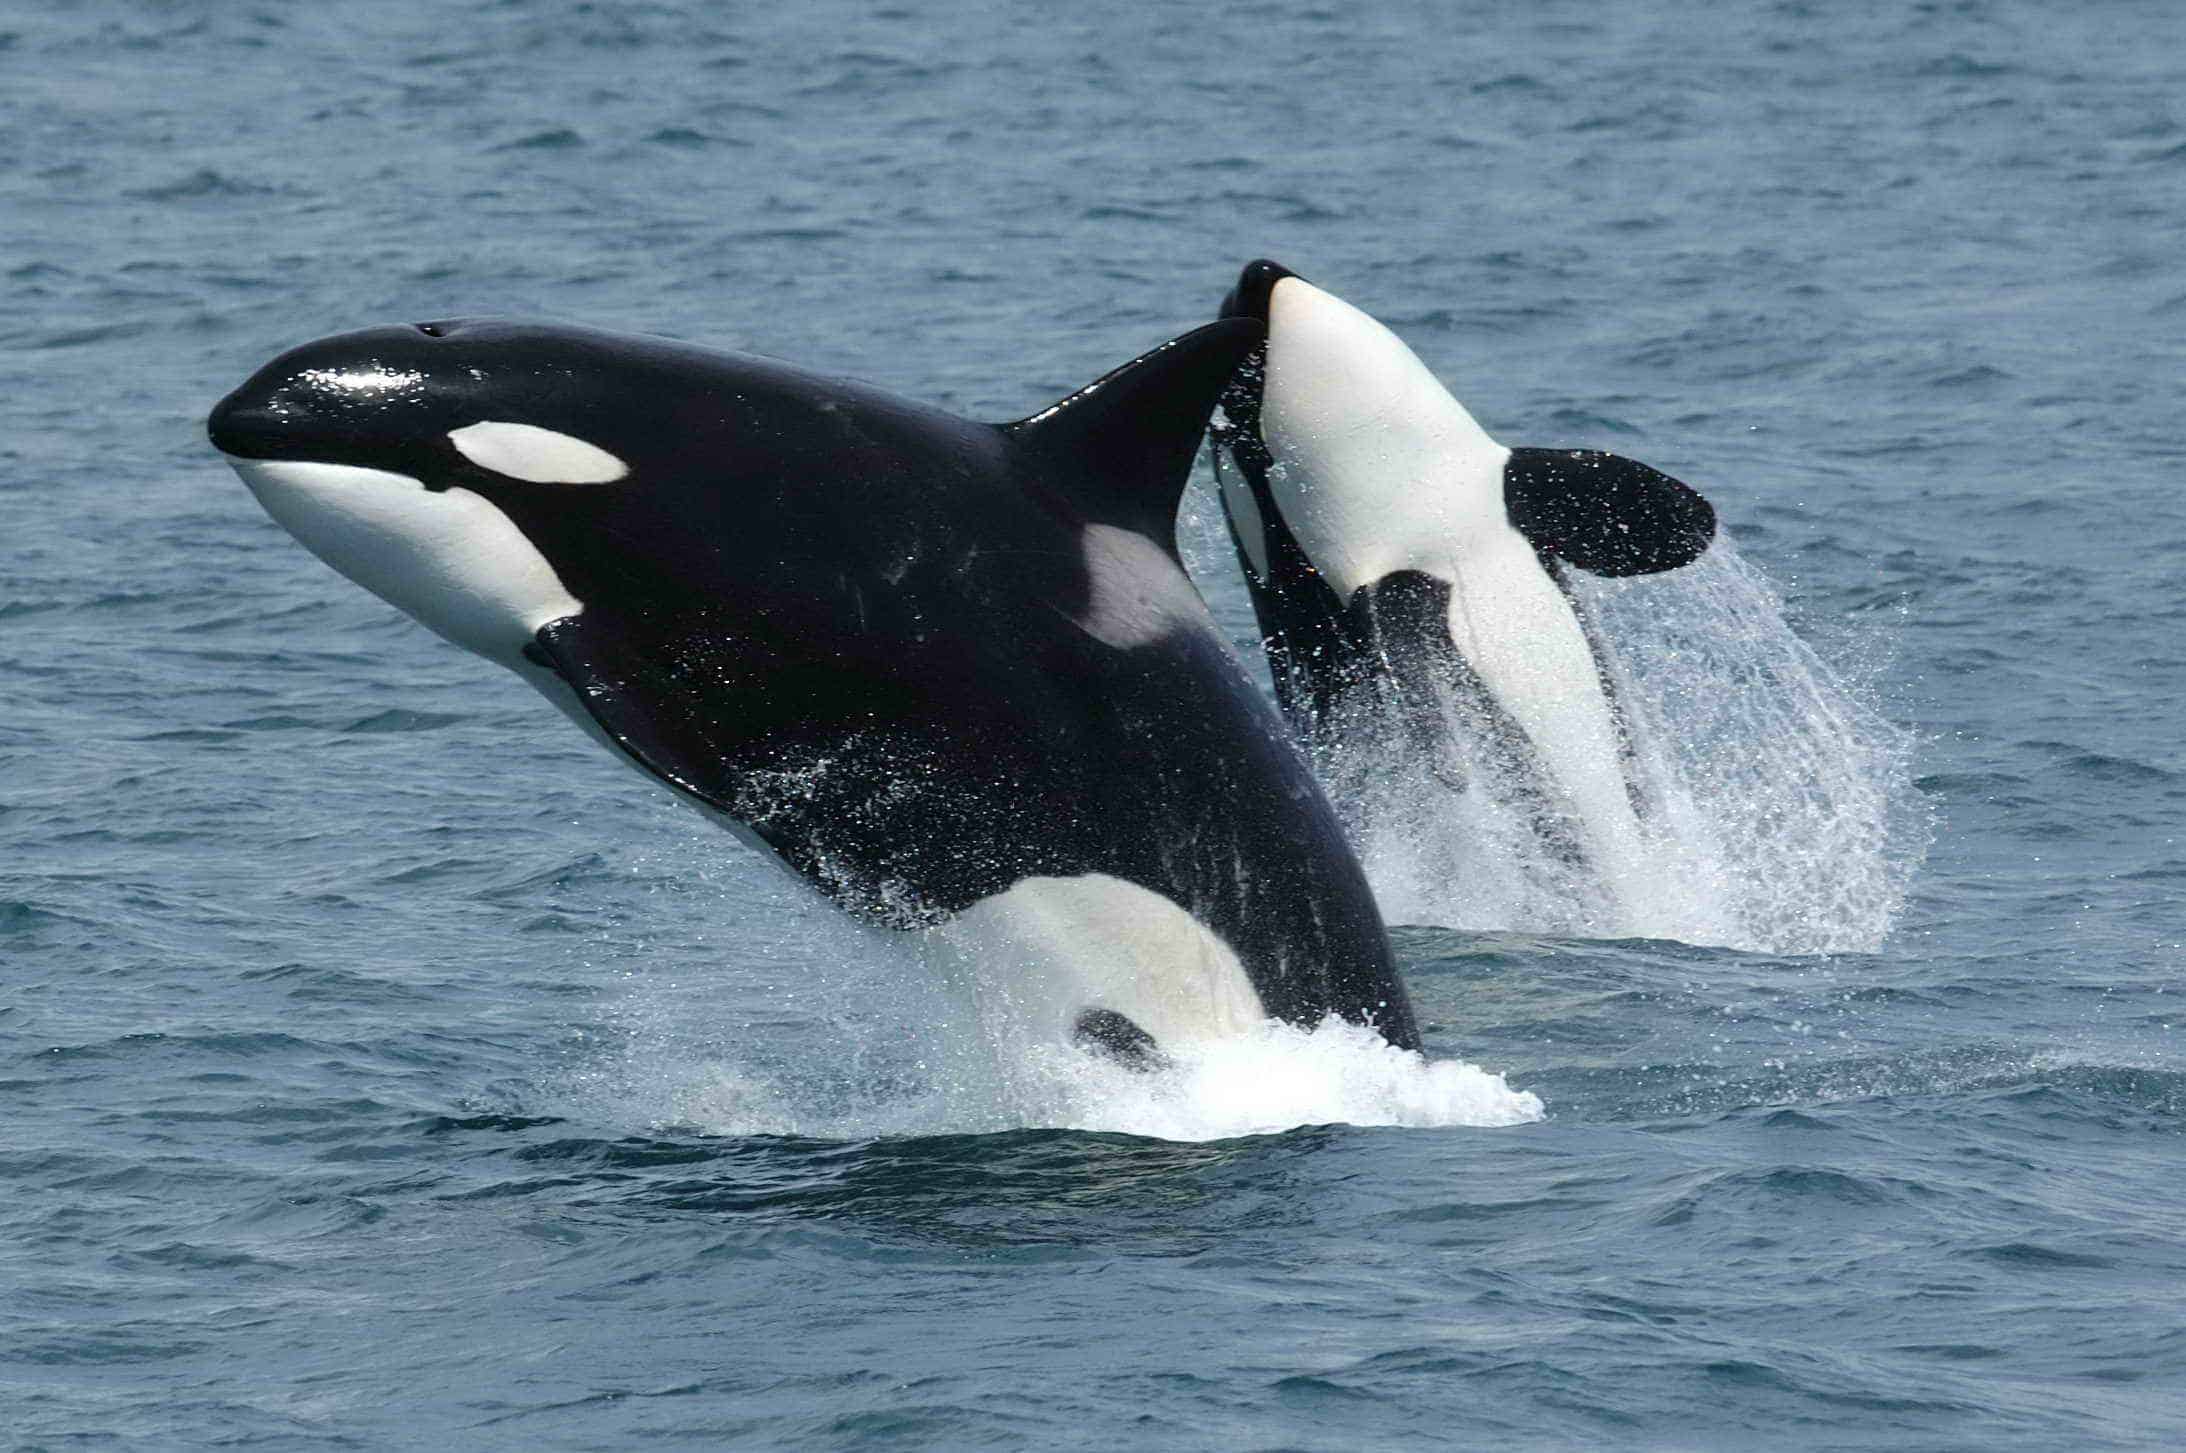 Killer whales also reach menopause later in their life. Image credits: Robert Pittman / NOAA.